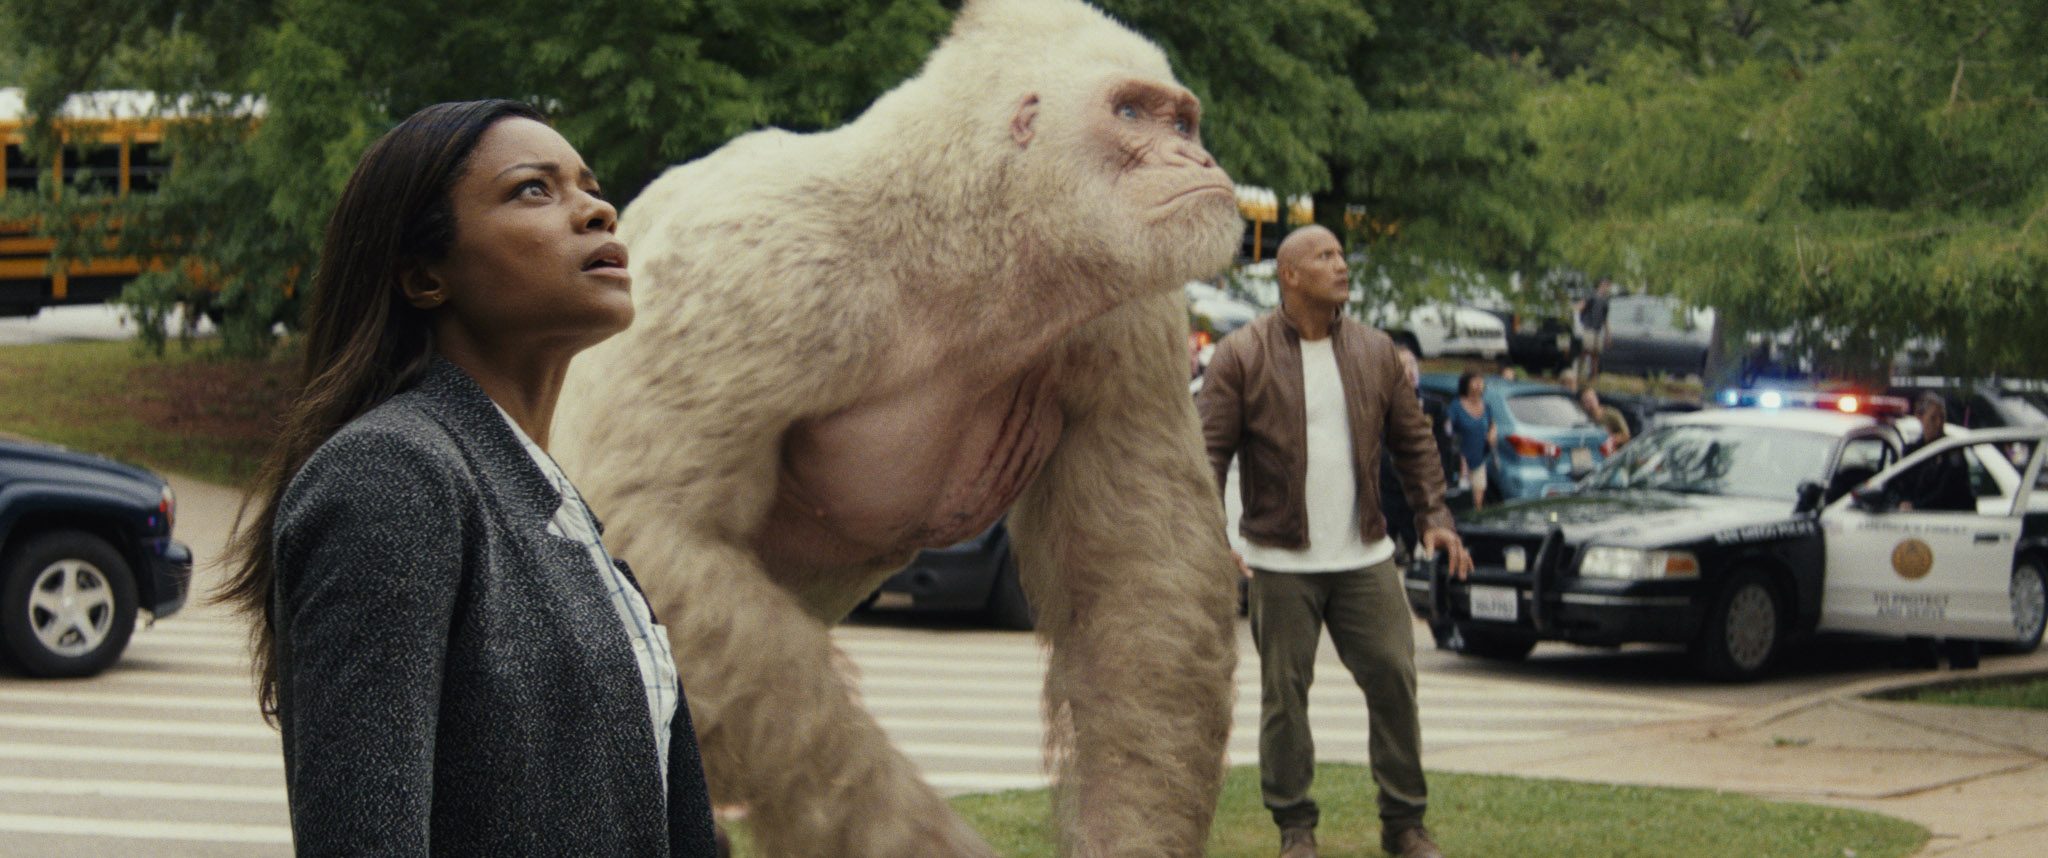 DISASTER IN WAITING. Naomi Harris and Dwayne Johnson in a scene from 'Rampage.' 